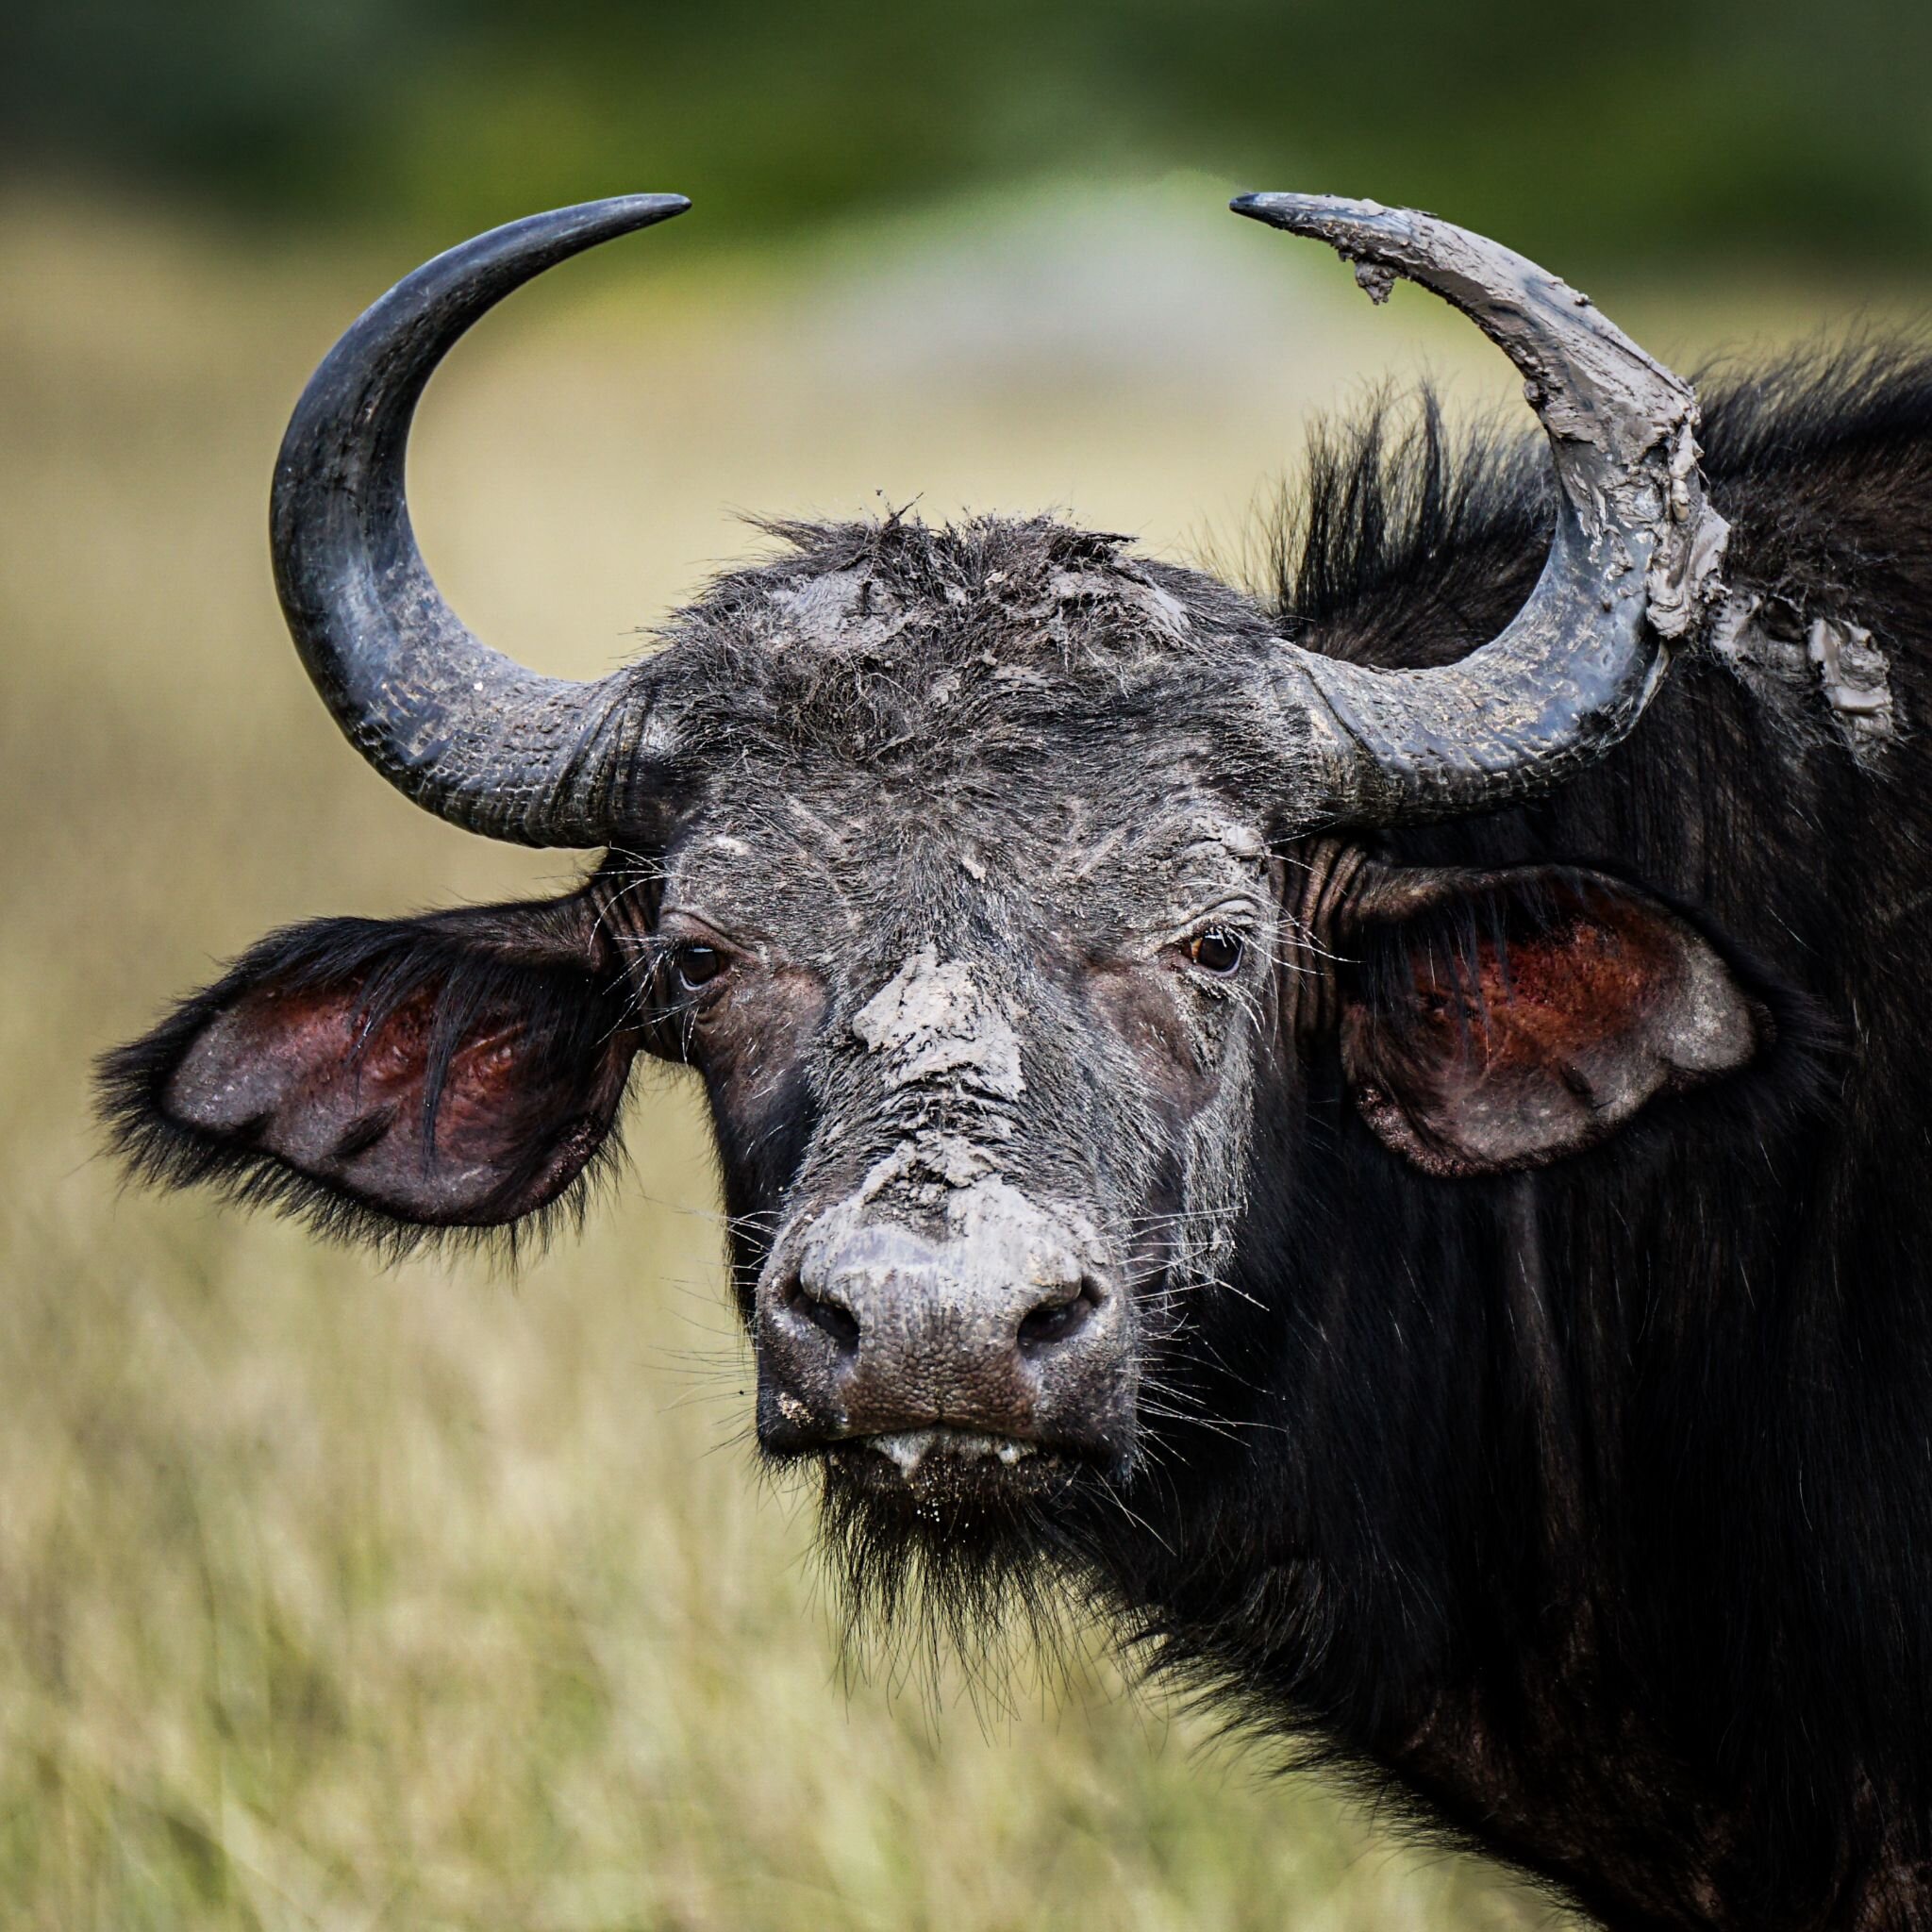 This Halloween, I thought I would wear a mask...

The muddy appearance isn't just a fashion statement; it's a practical choice for these rugged and resourceful creatures. The mud protects the skin of the Cape Buffalo, from the scorching African sun a